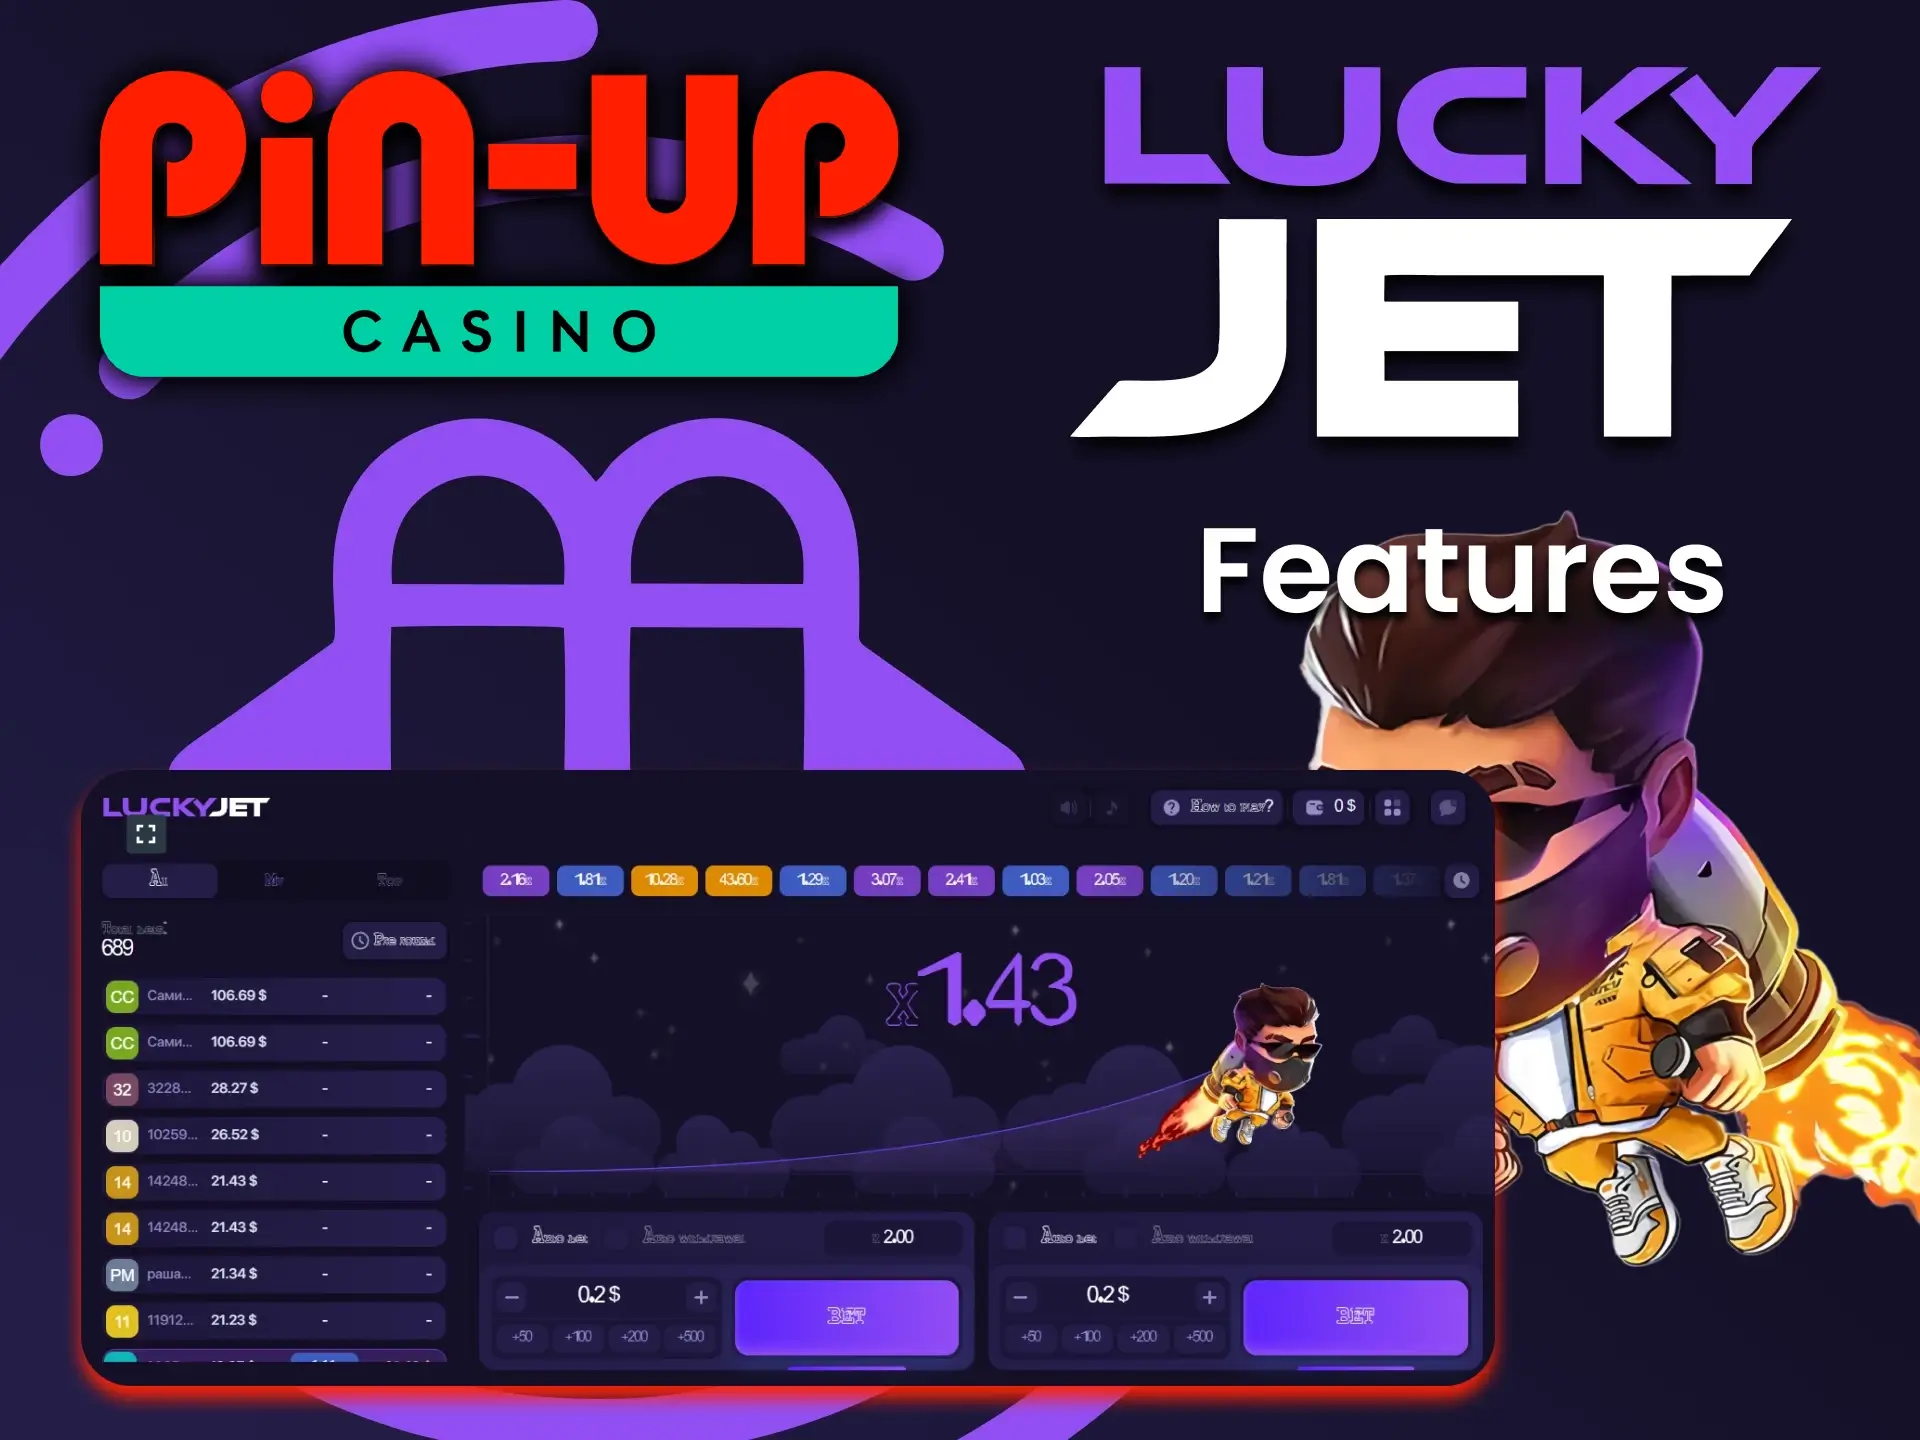 Find out about the future of Lucky Jet at Pin Up.